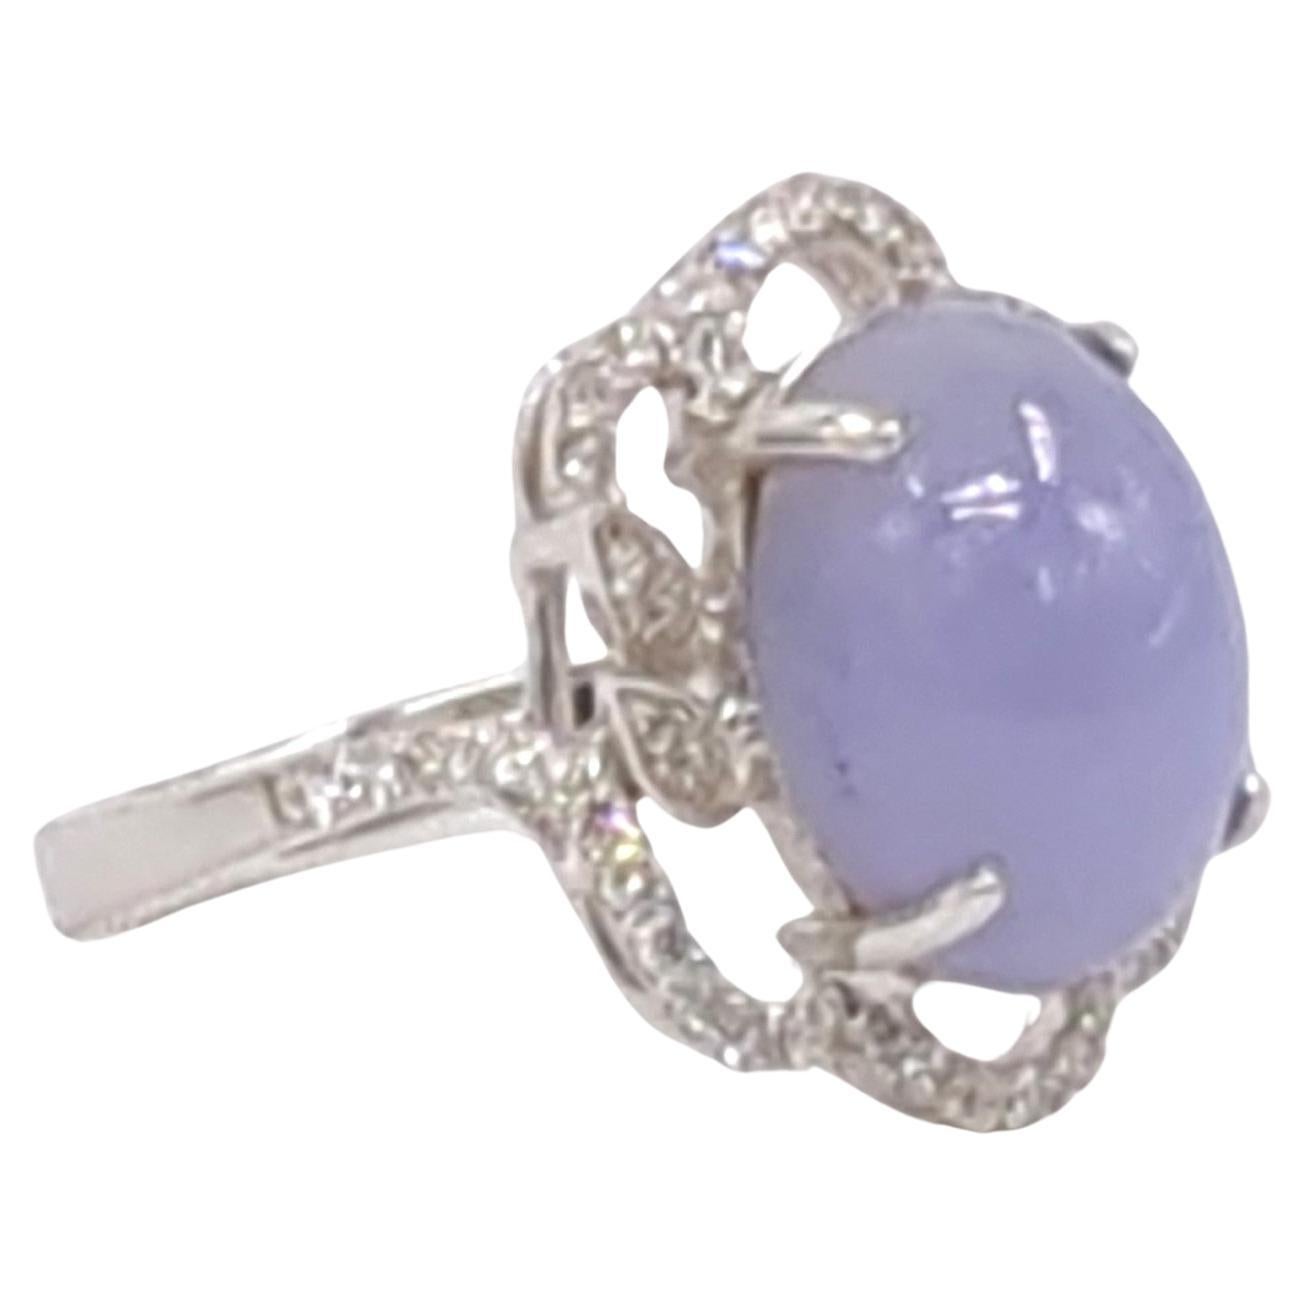 This exquisite ladies' ring is a true work of art, skillfully crafted in 18K white gold and weighing 5.10 grams. At the center of its design lies a captivating oval cabochon of lavender jadeite, which has been certified as A-grade by the NGTC. The